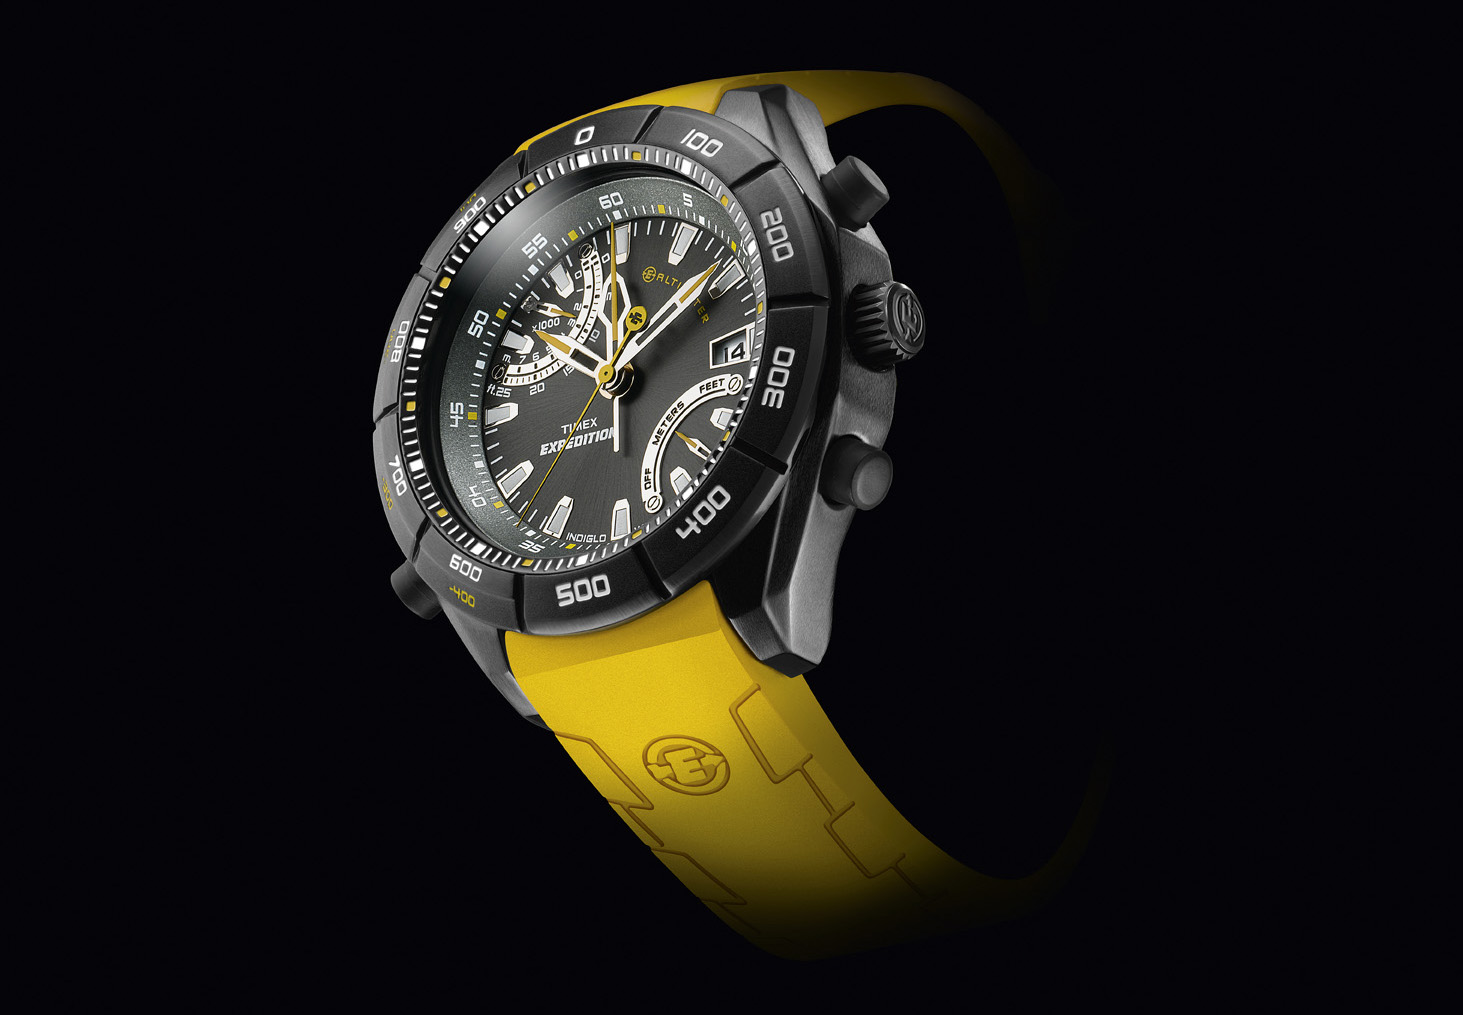 Timex Men’s E-Instruments E-Altimeter Expedition Watch